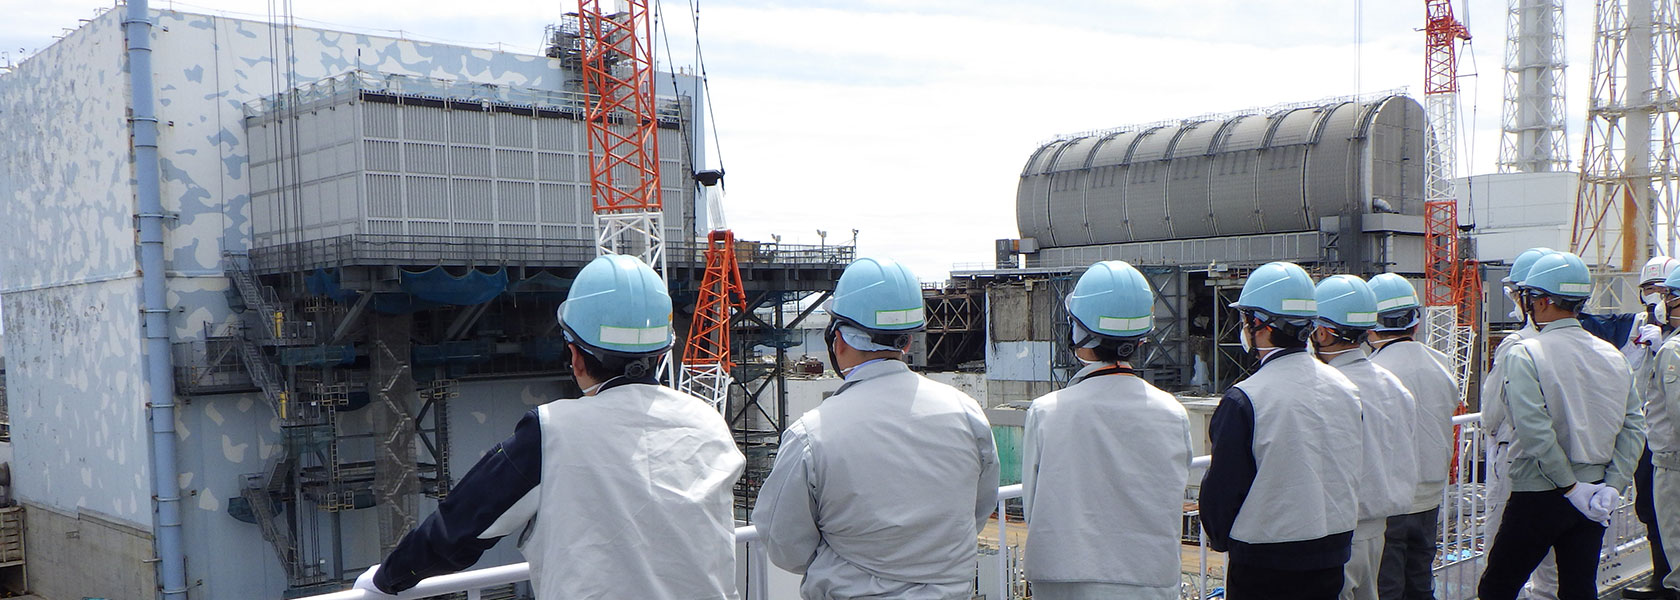 Progress of decommissioning at the nuclear power stations